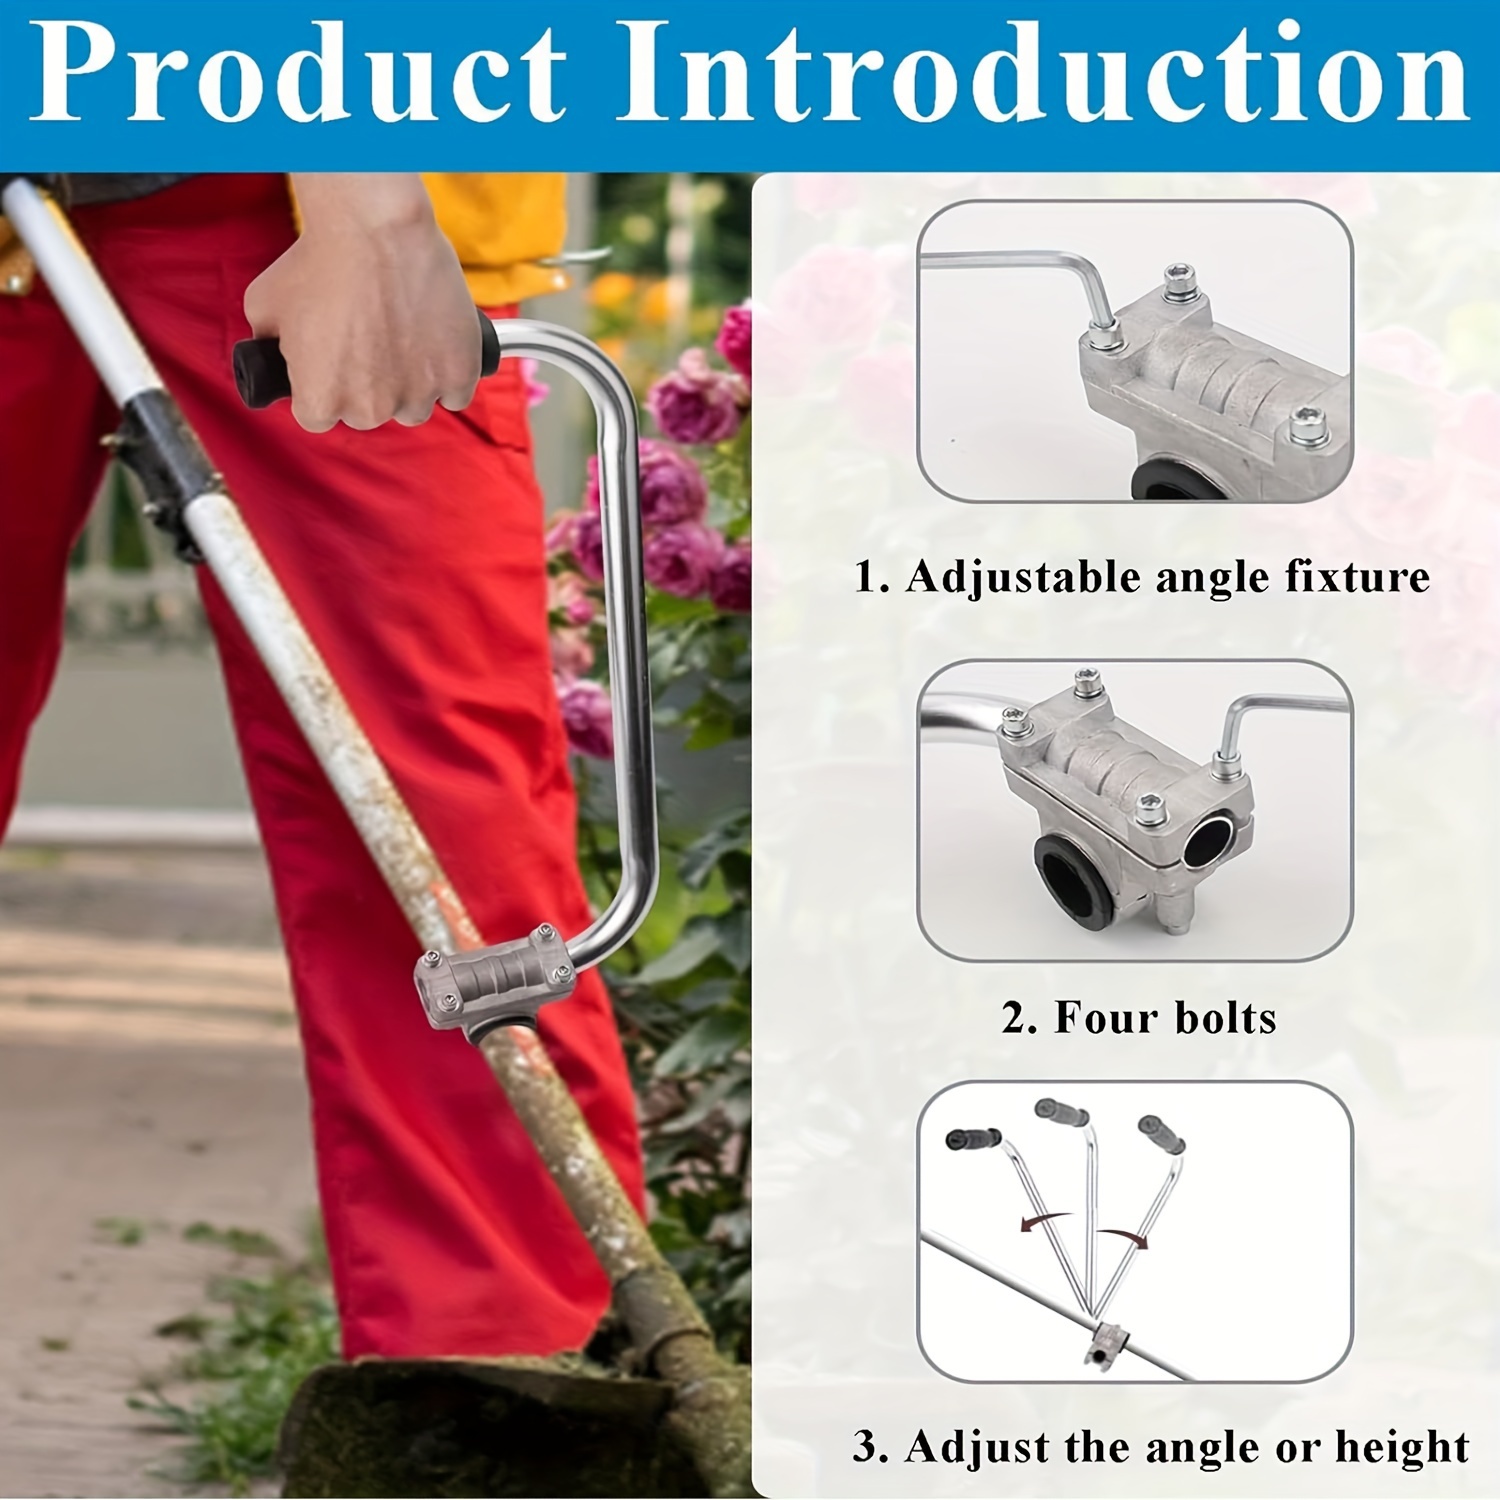 

Ergonomic Aluminum Trimmer Handle With Bracket Clamp - Perfect For Lawn Care, Landscaping & Yard Edging